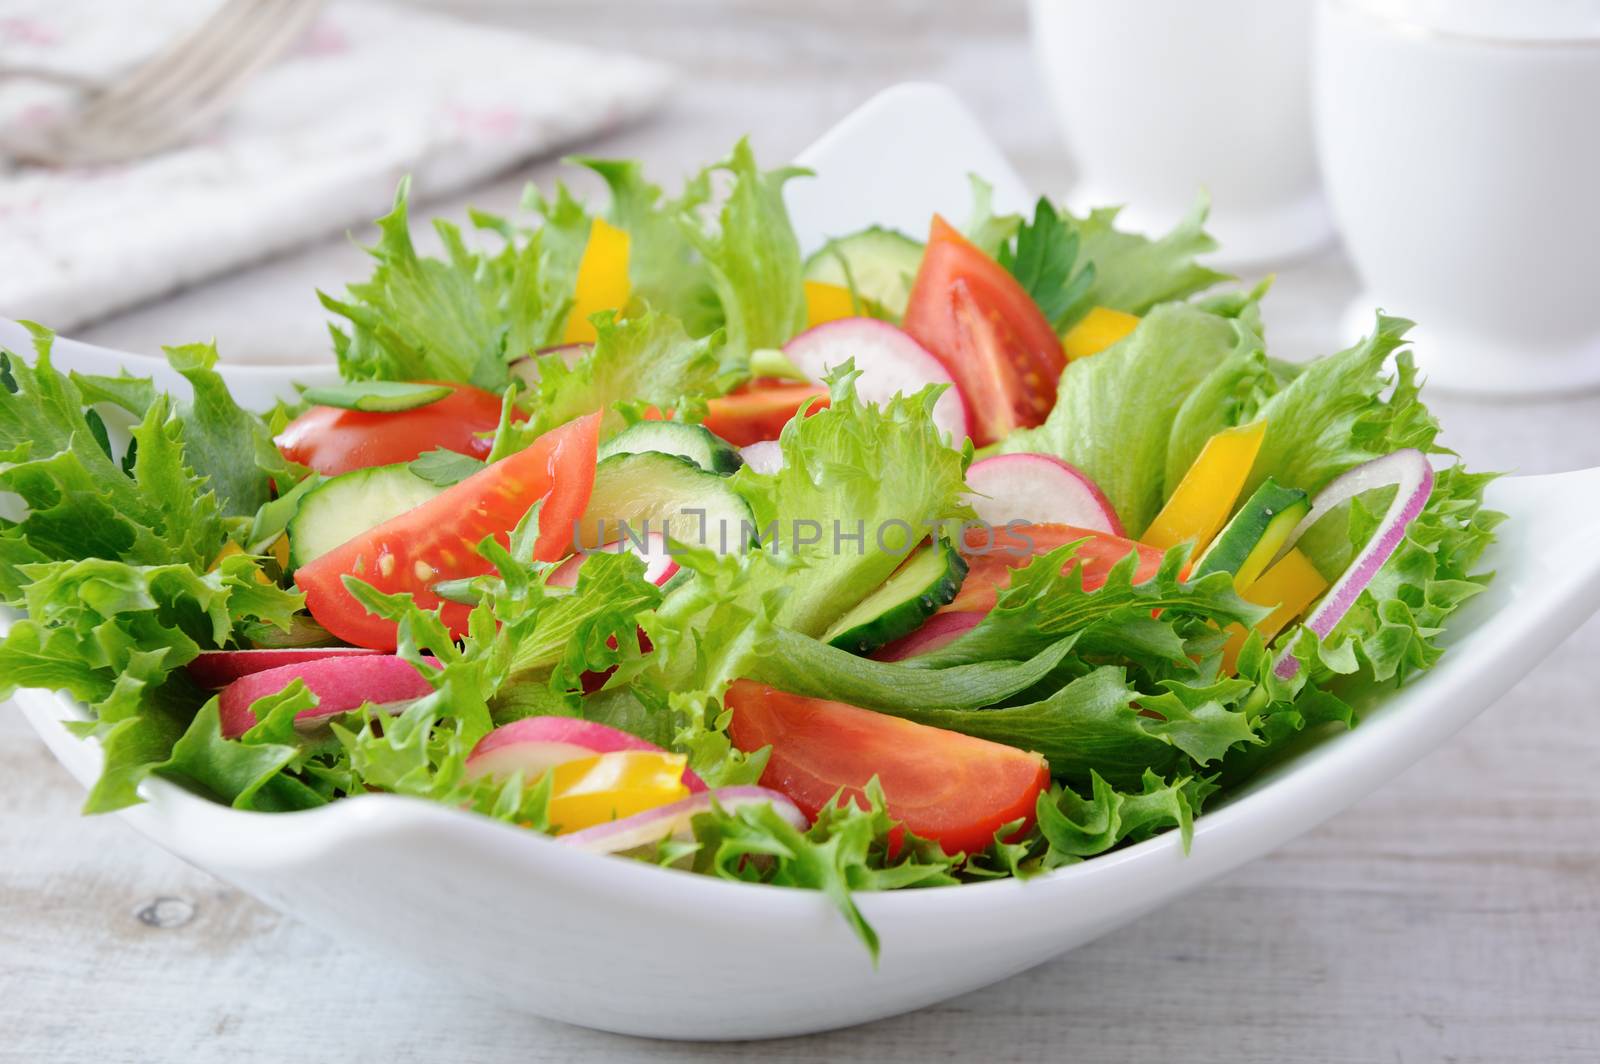 Summer vegetable salad from lettuce leaves with slices of crispy cucumber, tomato slices, radish, seasoned with herbs with fragrant sweet yellow pepper.
A great idea for a healthy lifestyle.